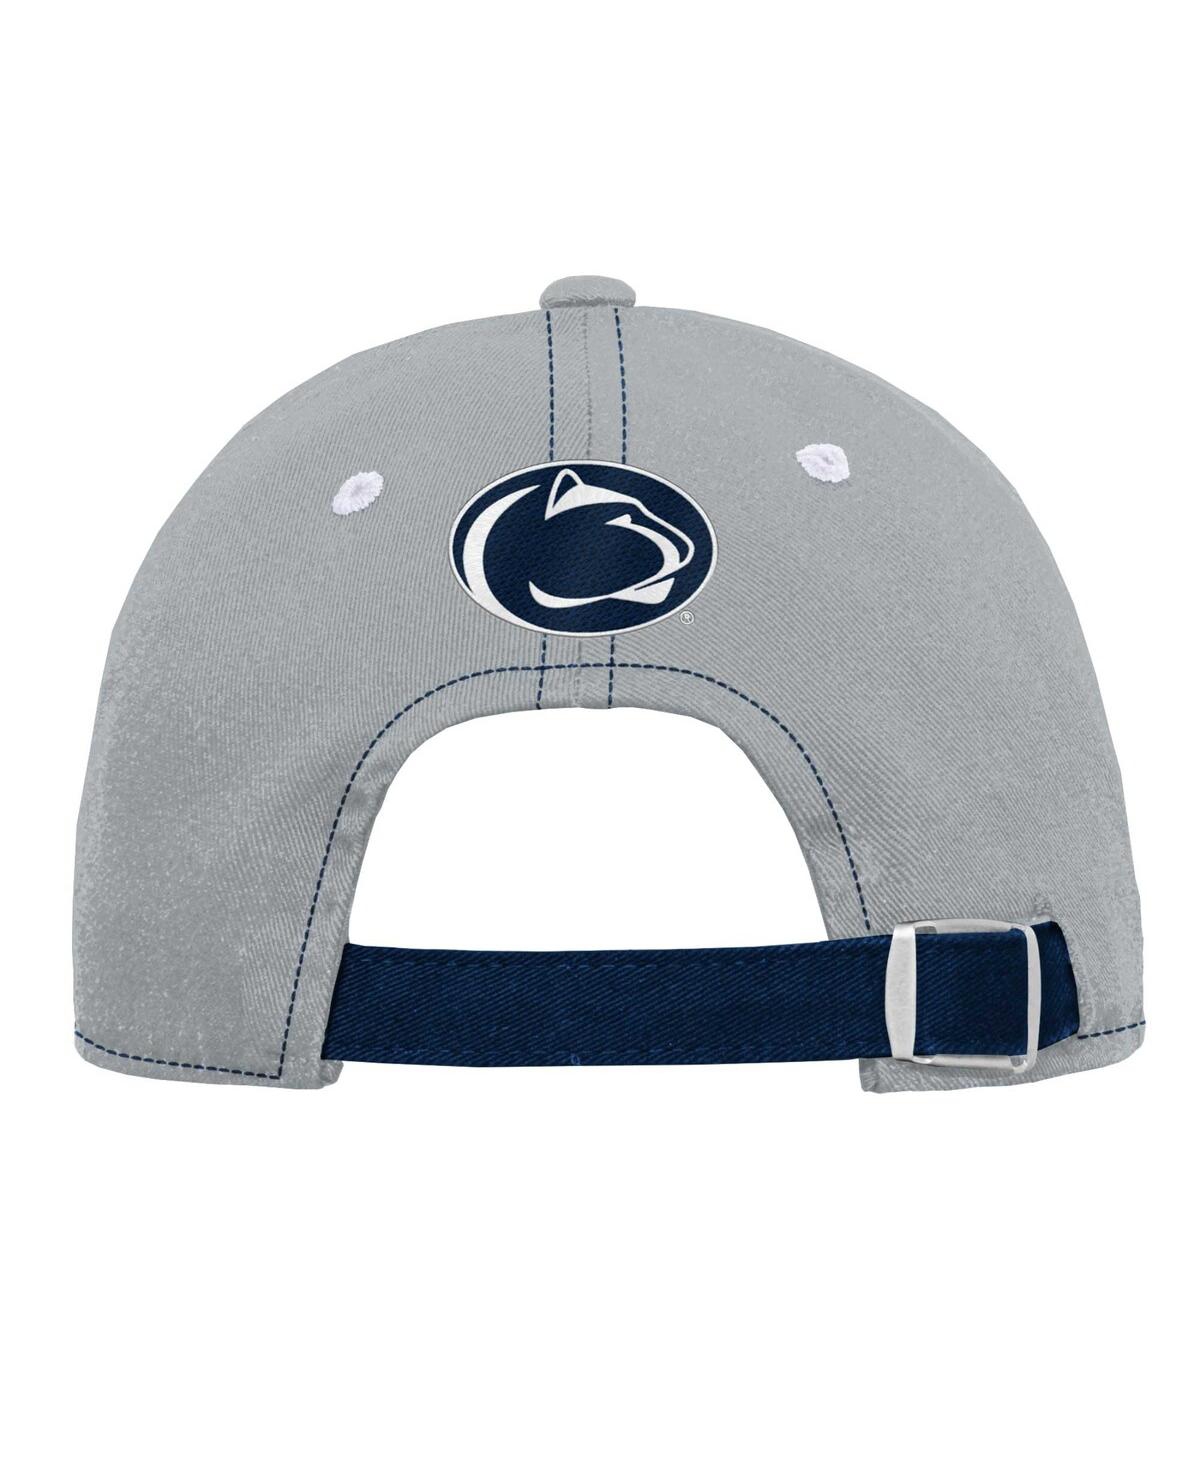 Shop Outerstuff Youth Boys And Girls Gray Penn State Nittany Lions Old School Slouch Adjustable Hat